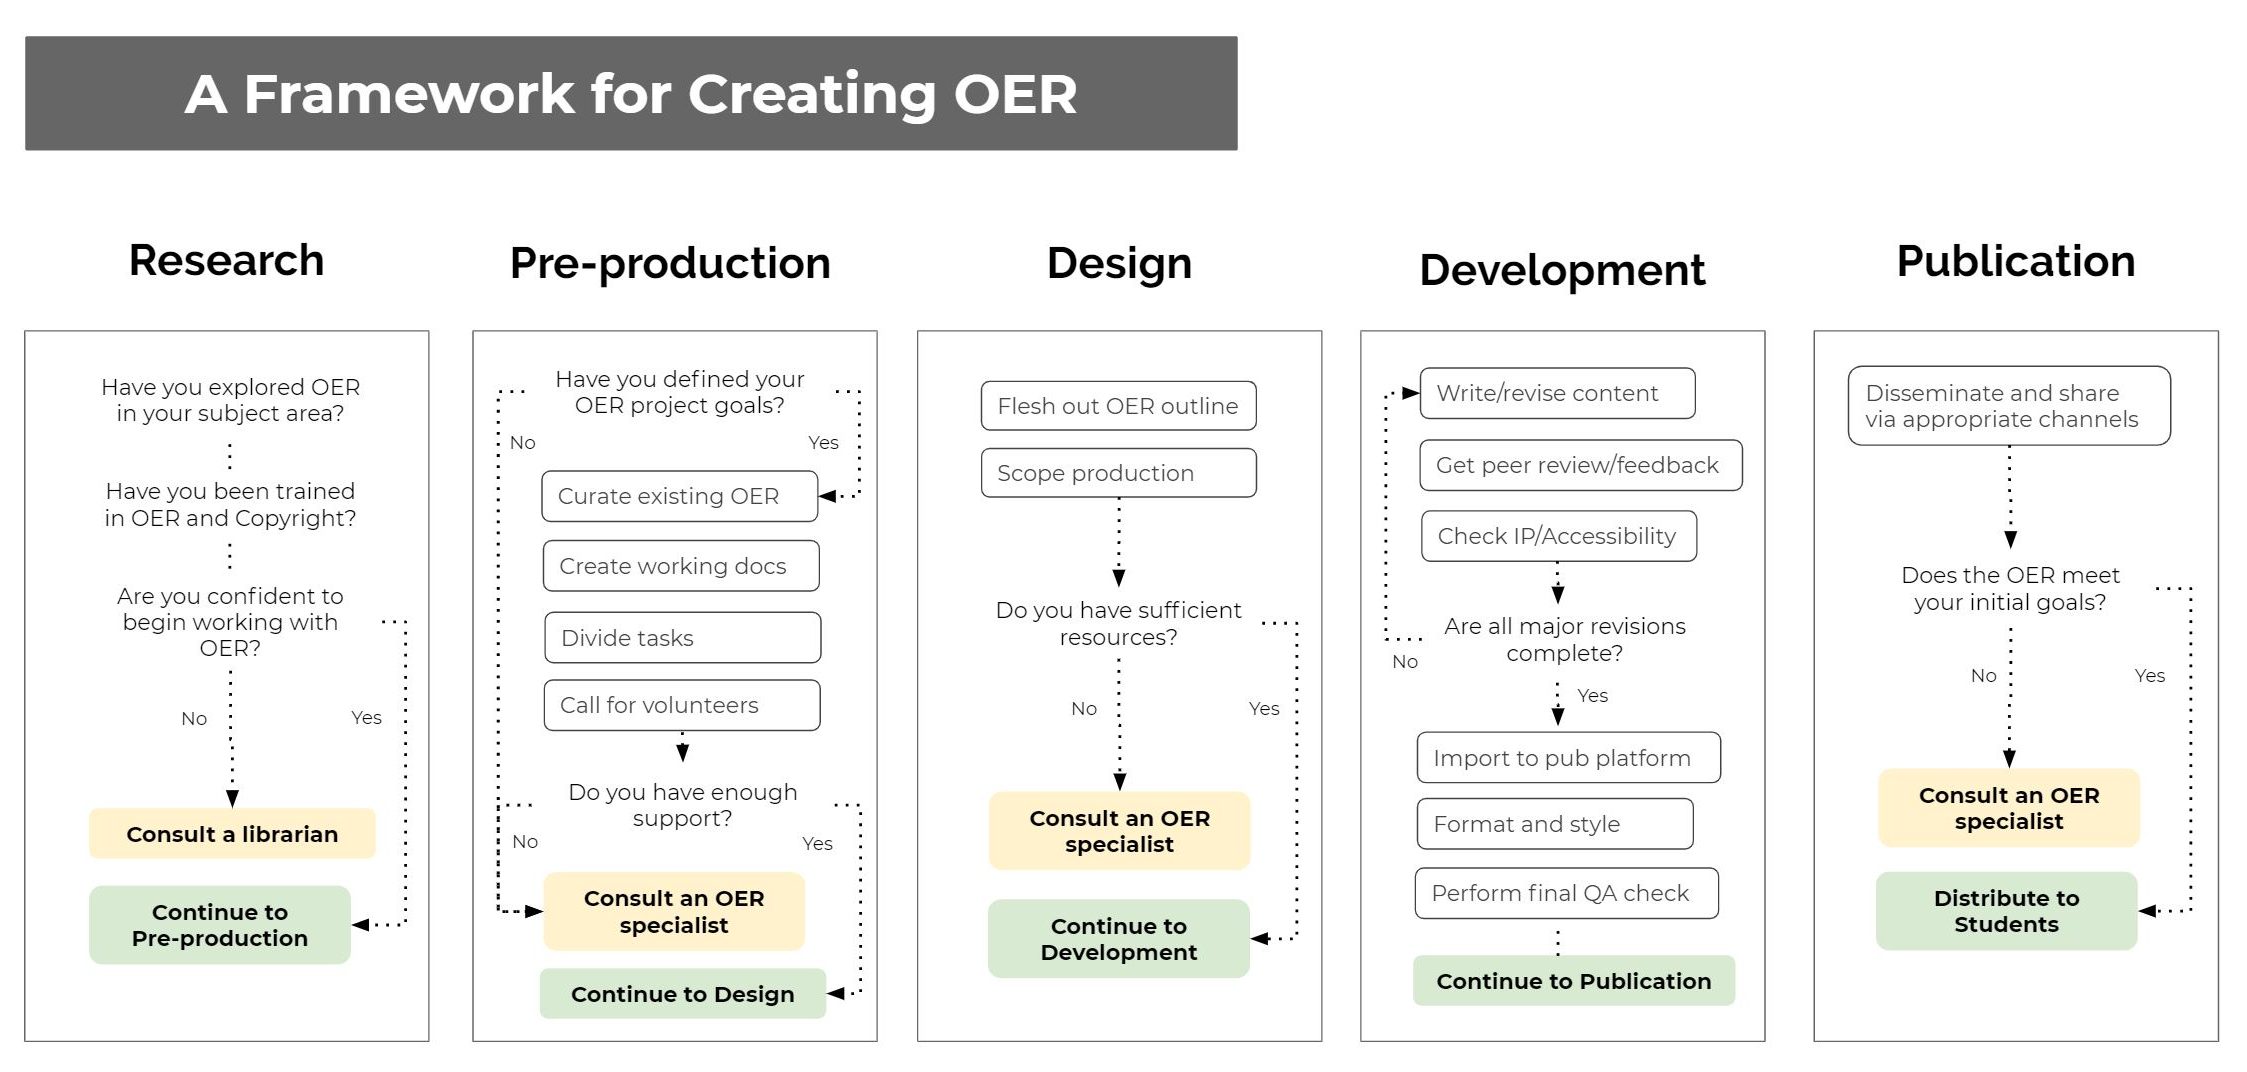 Screenshot of a framework for creating OER. Shows five phases: research, pre-production, design, development, and publication.